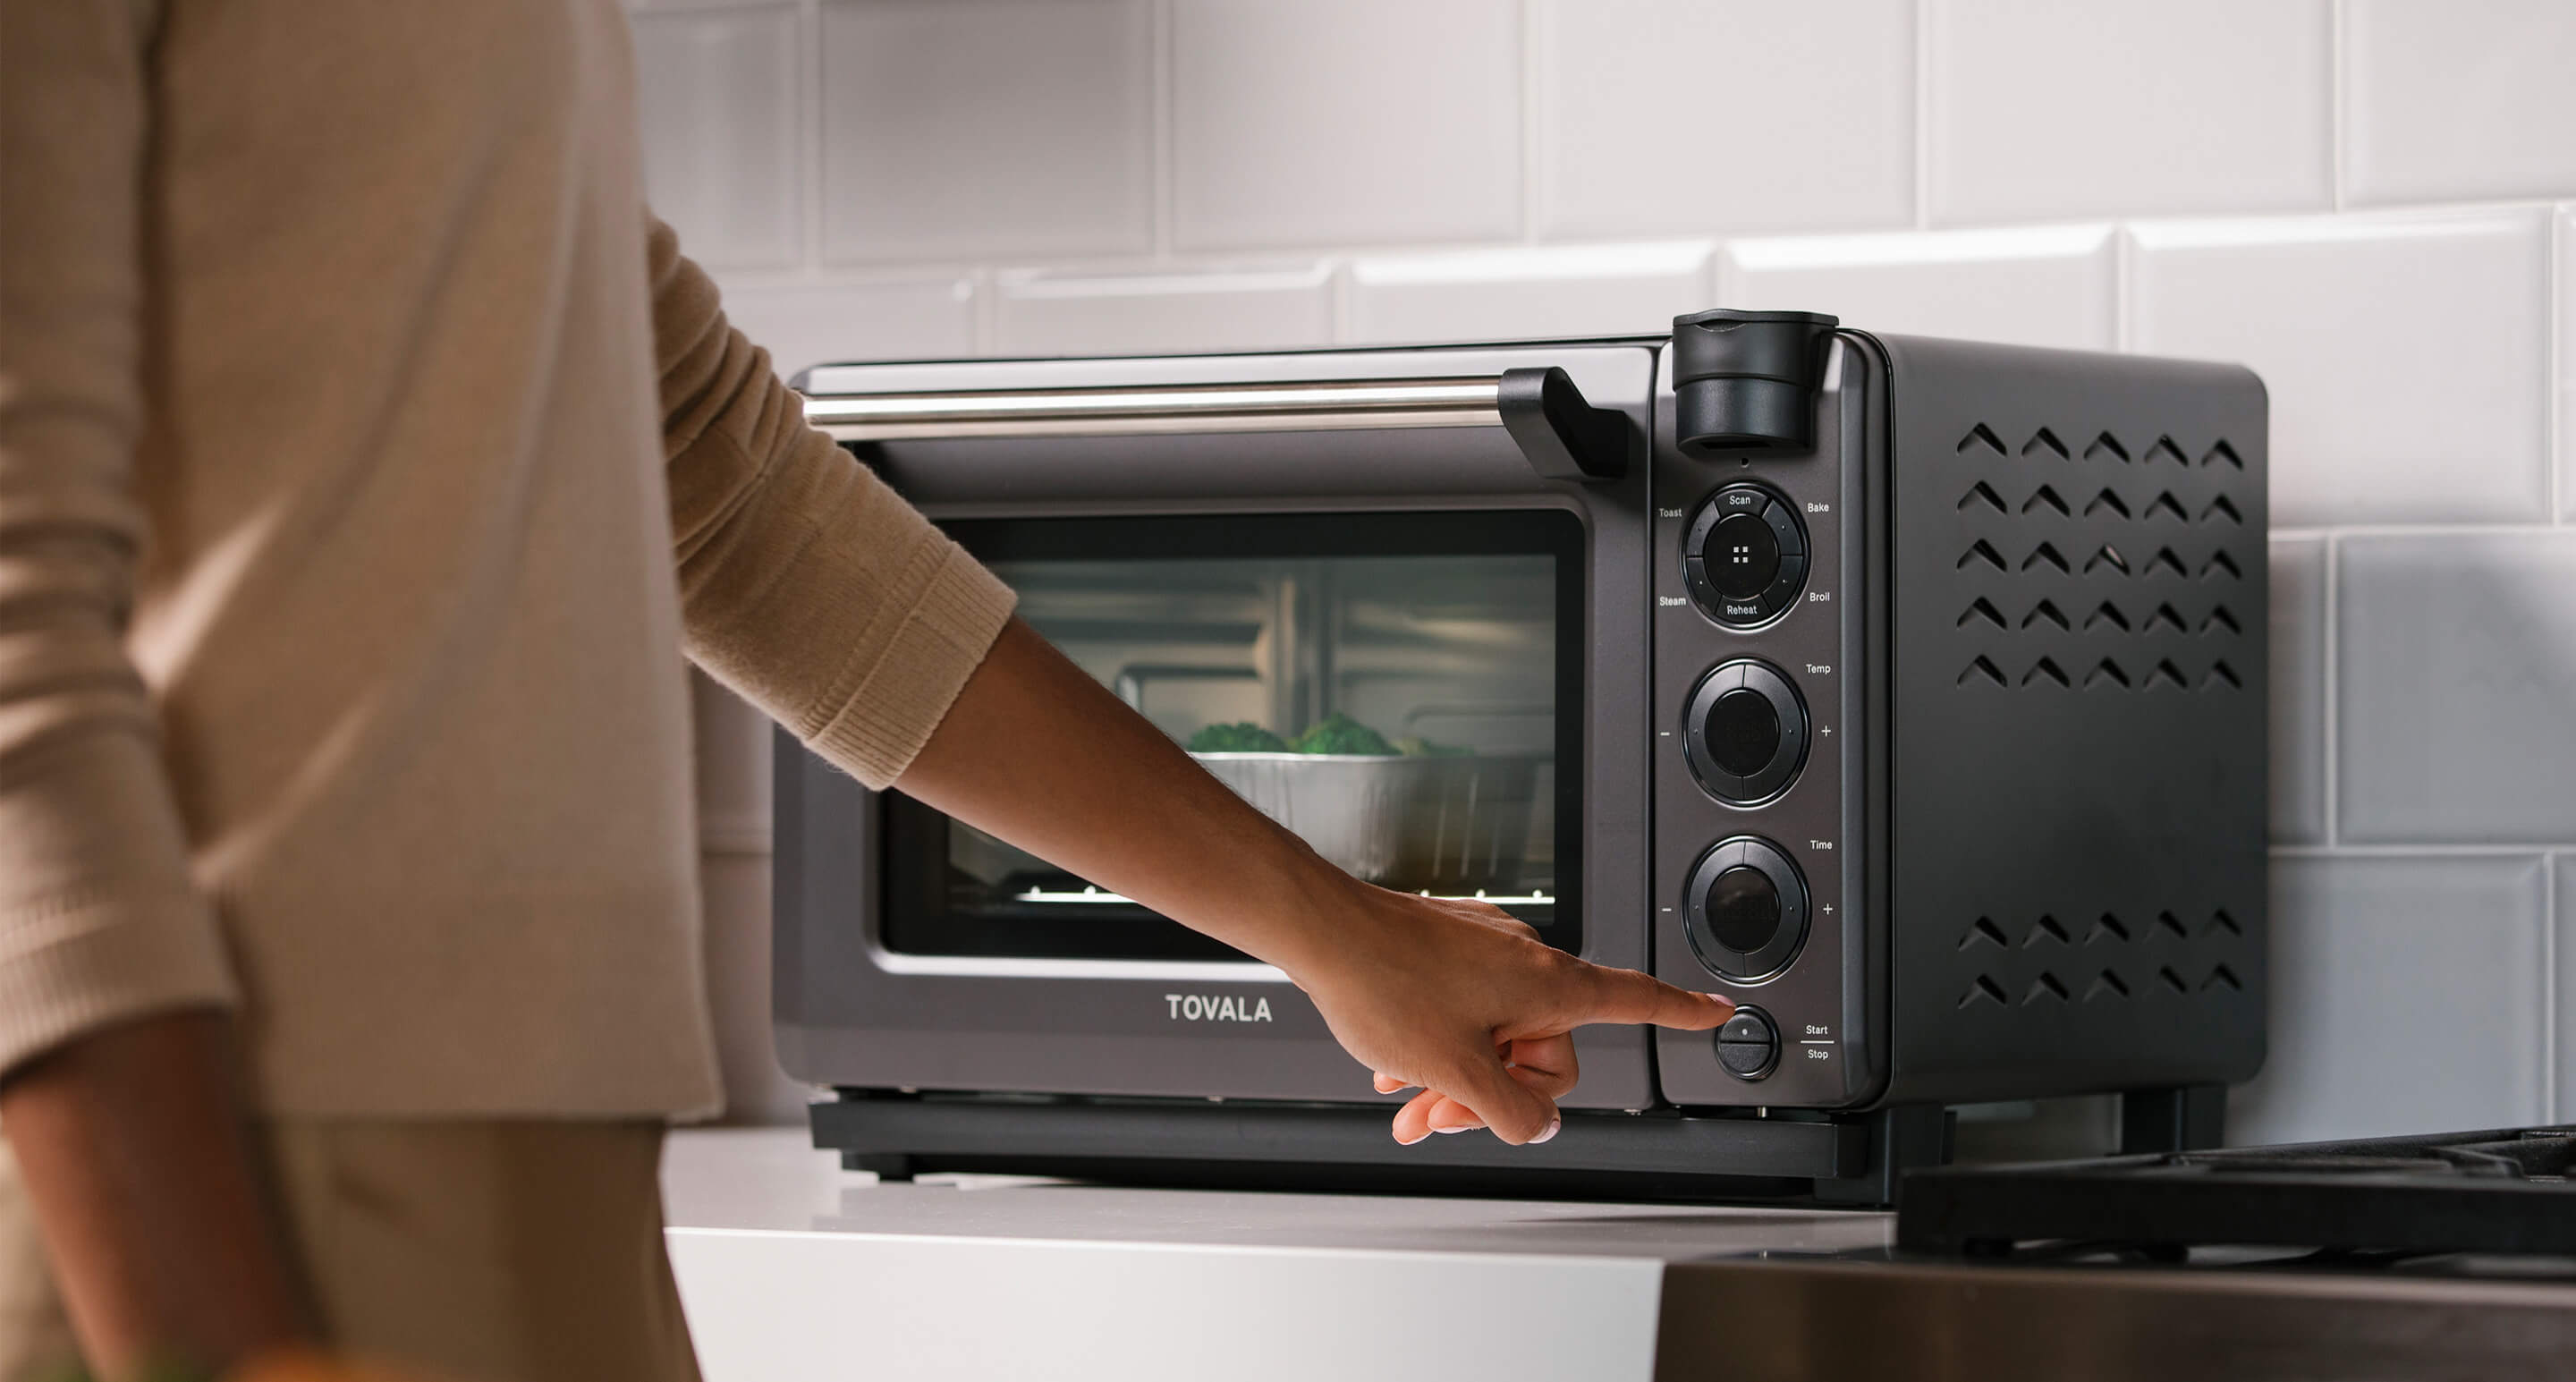 AHEAD OF VALENTINE'S DAY, TOVALA IS OFFERING FREE SMART OVENS FOR